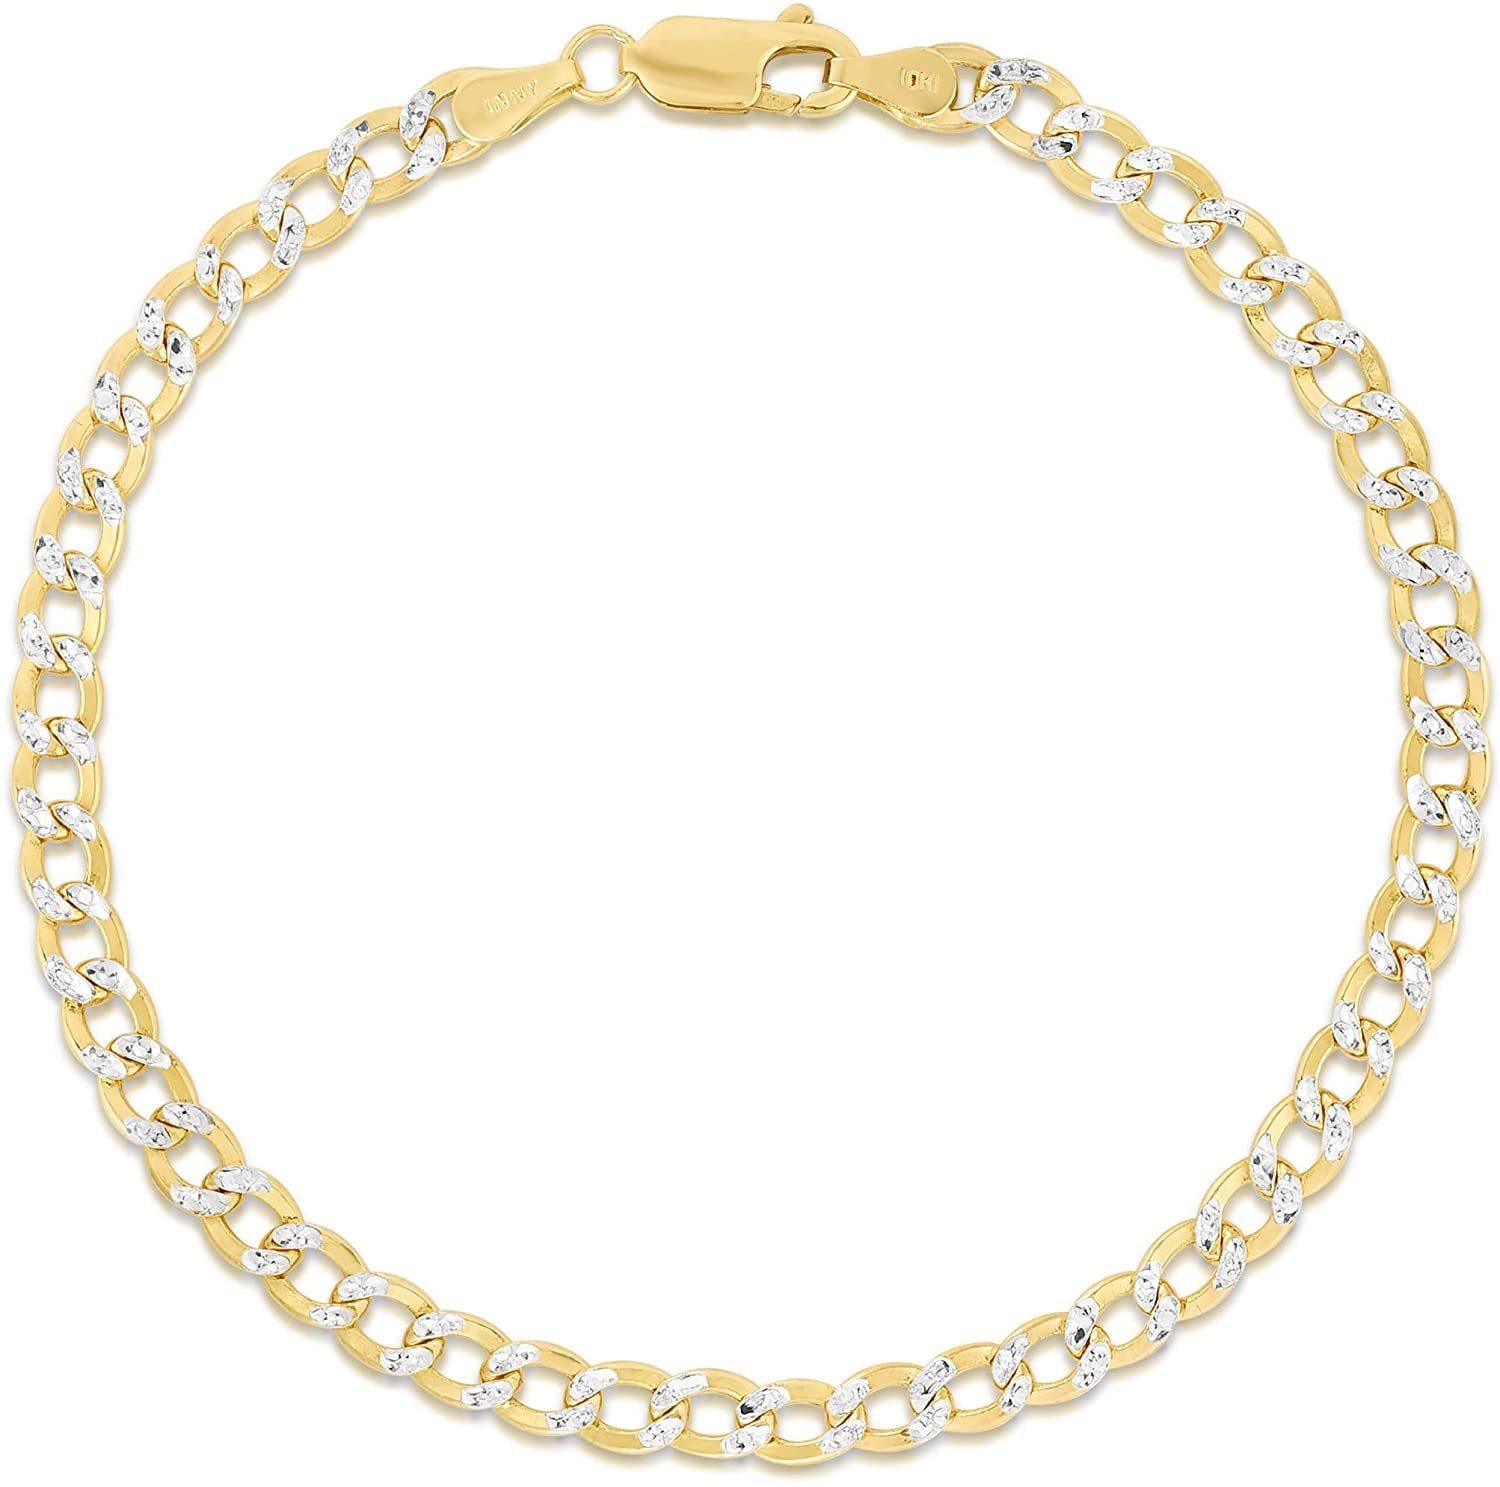 Floreo 10k Yellow Gold 4.5mm Two Tone Lightweight White Pave Curb Bracelet and Anklet